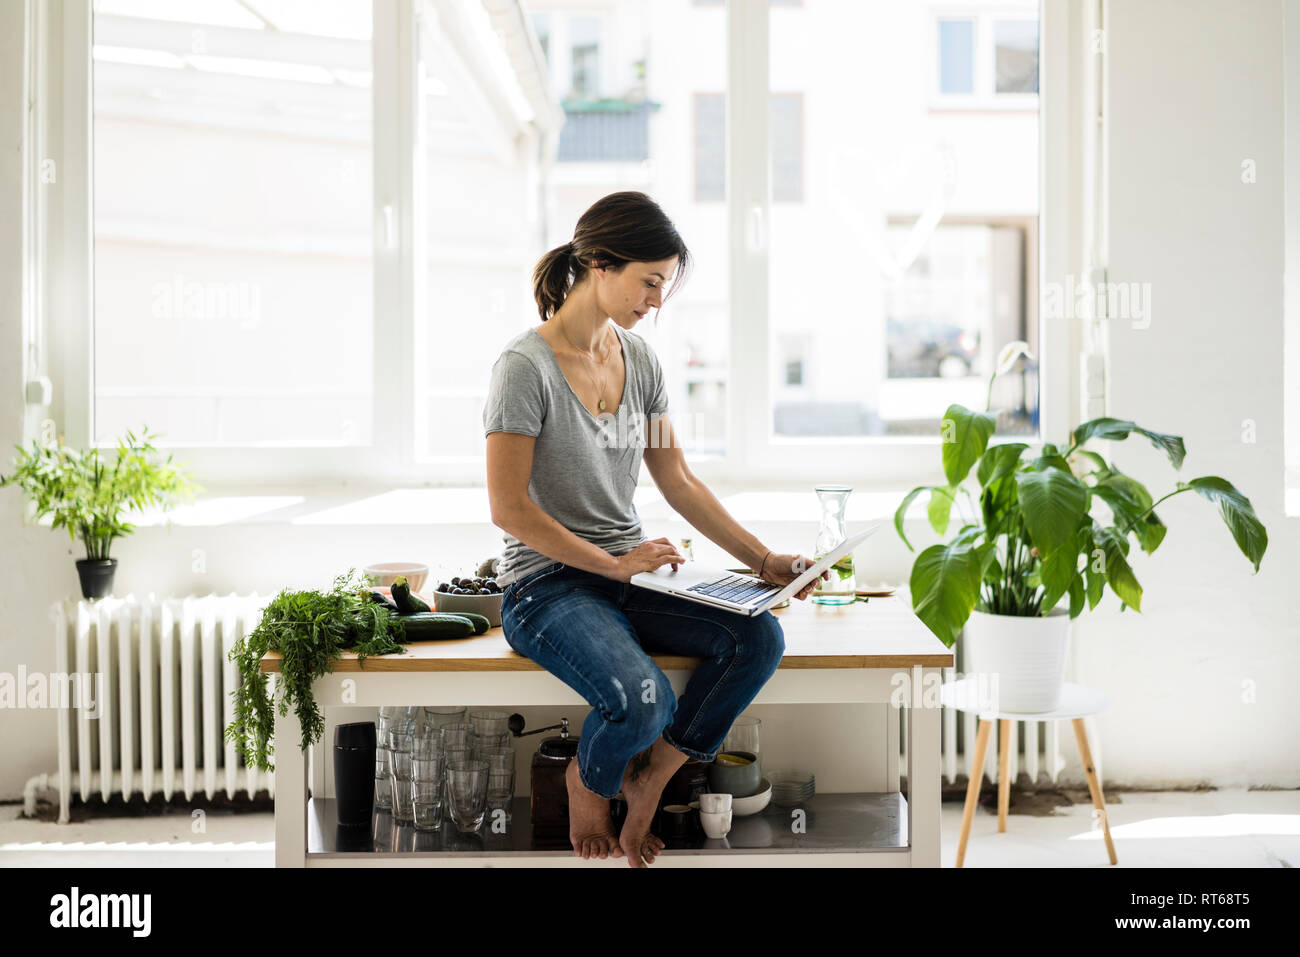 Woman sitting on kitchen table, searching for healthy recipes, using laptop Stock Photo